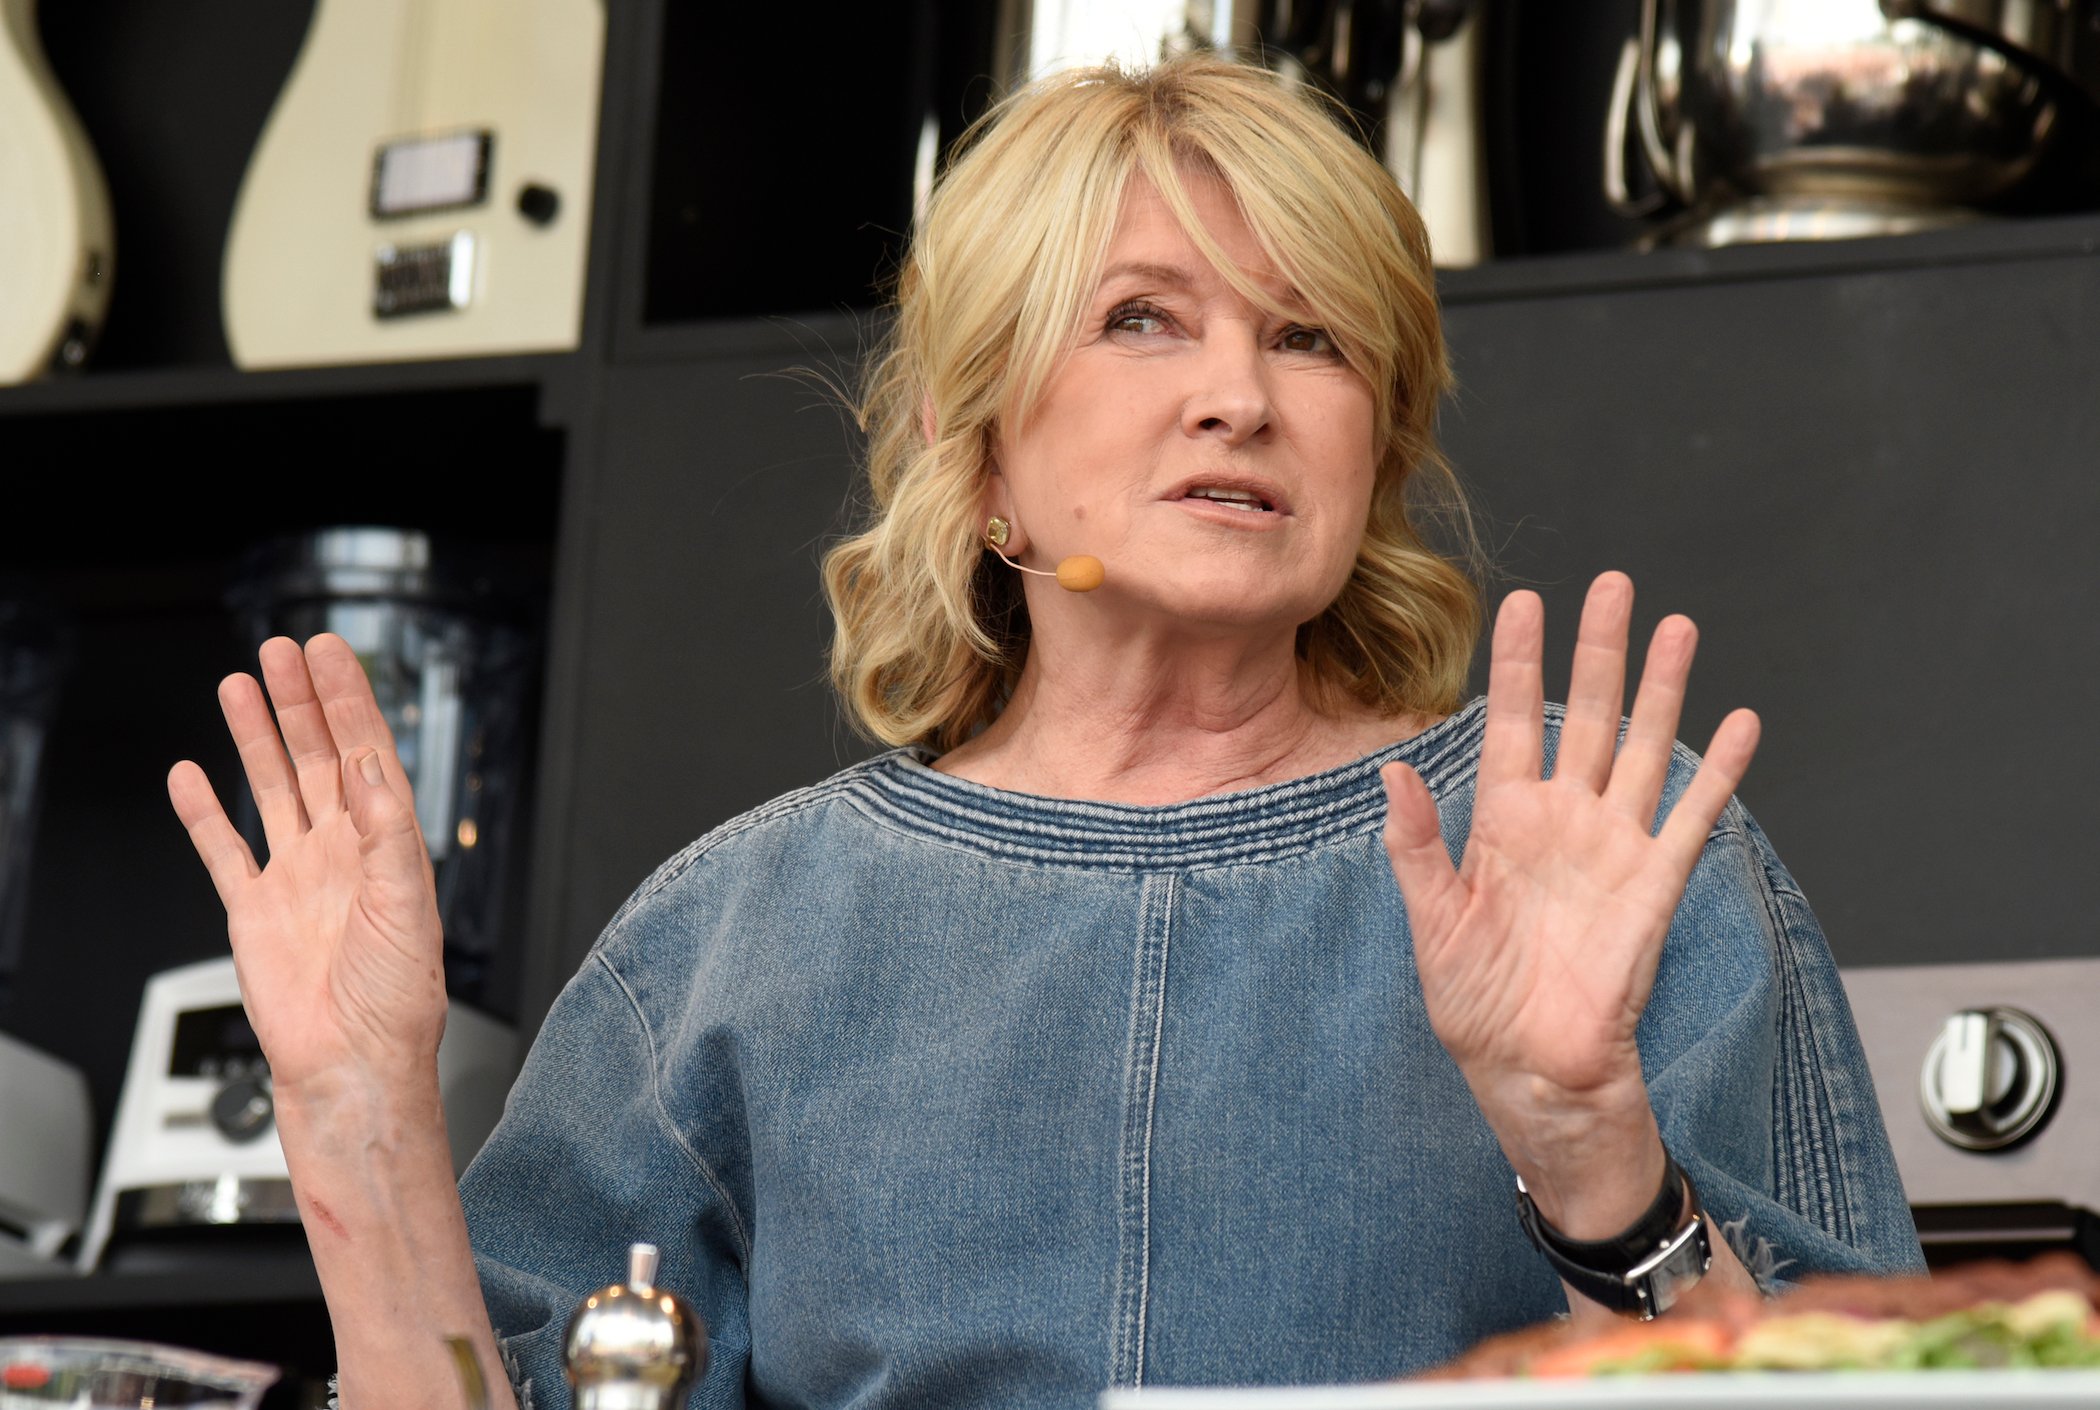 Martha Stewart, a famous cook known for her accessible recipes, speaking into a microphone at an event